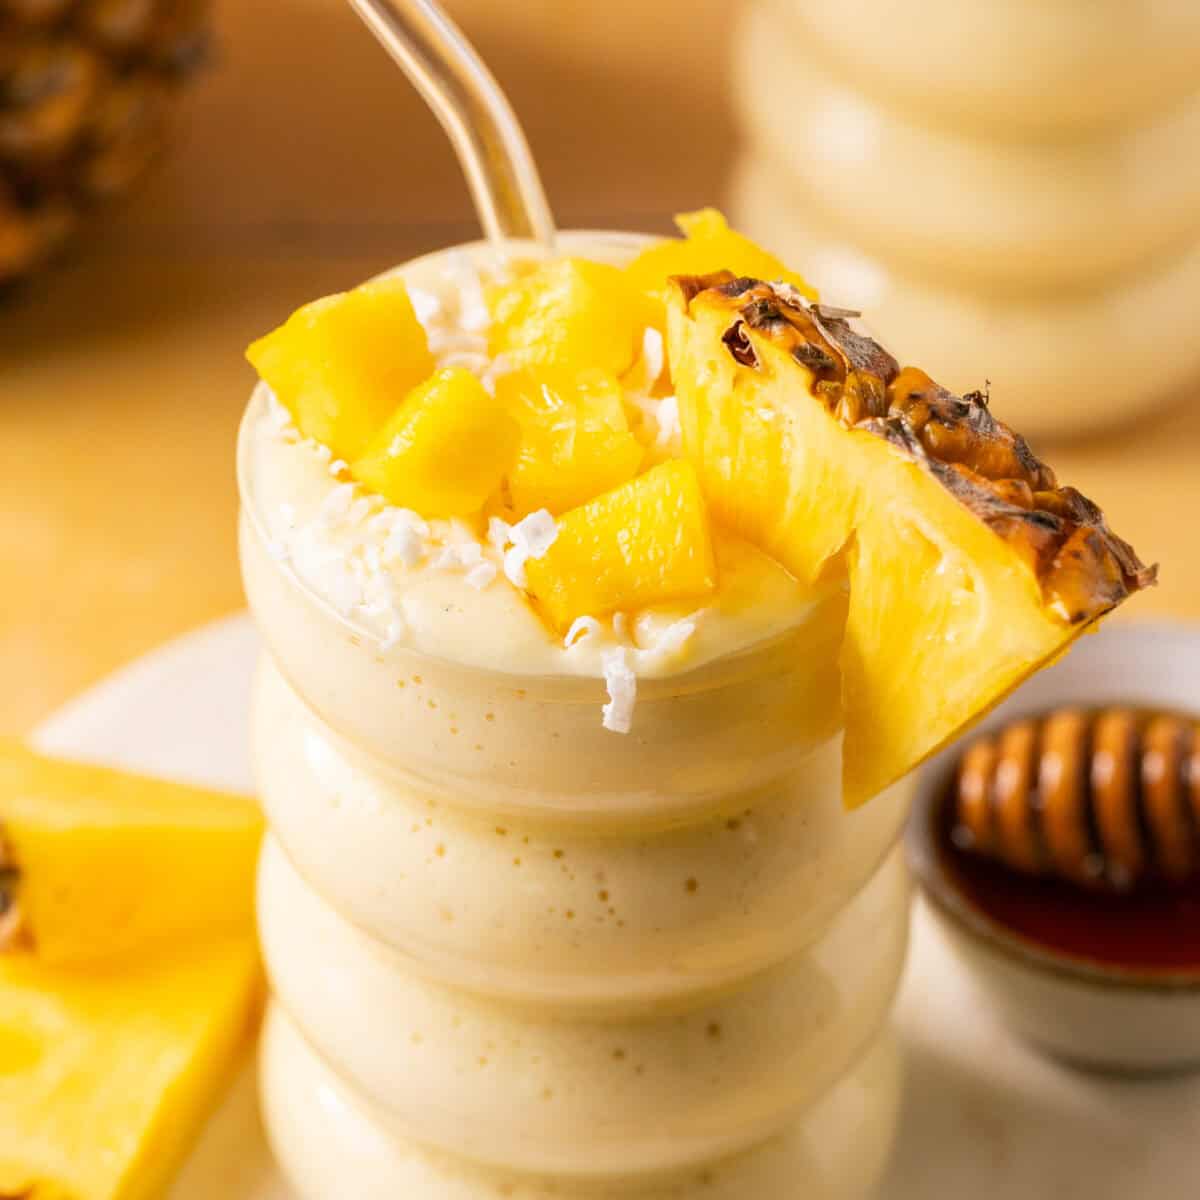 Smoothie topped with fresh pineapple and coconut flakes.